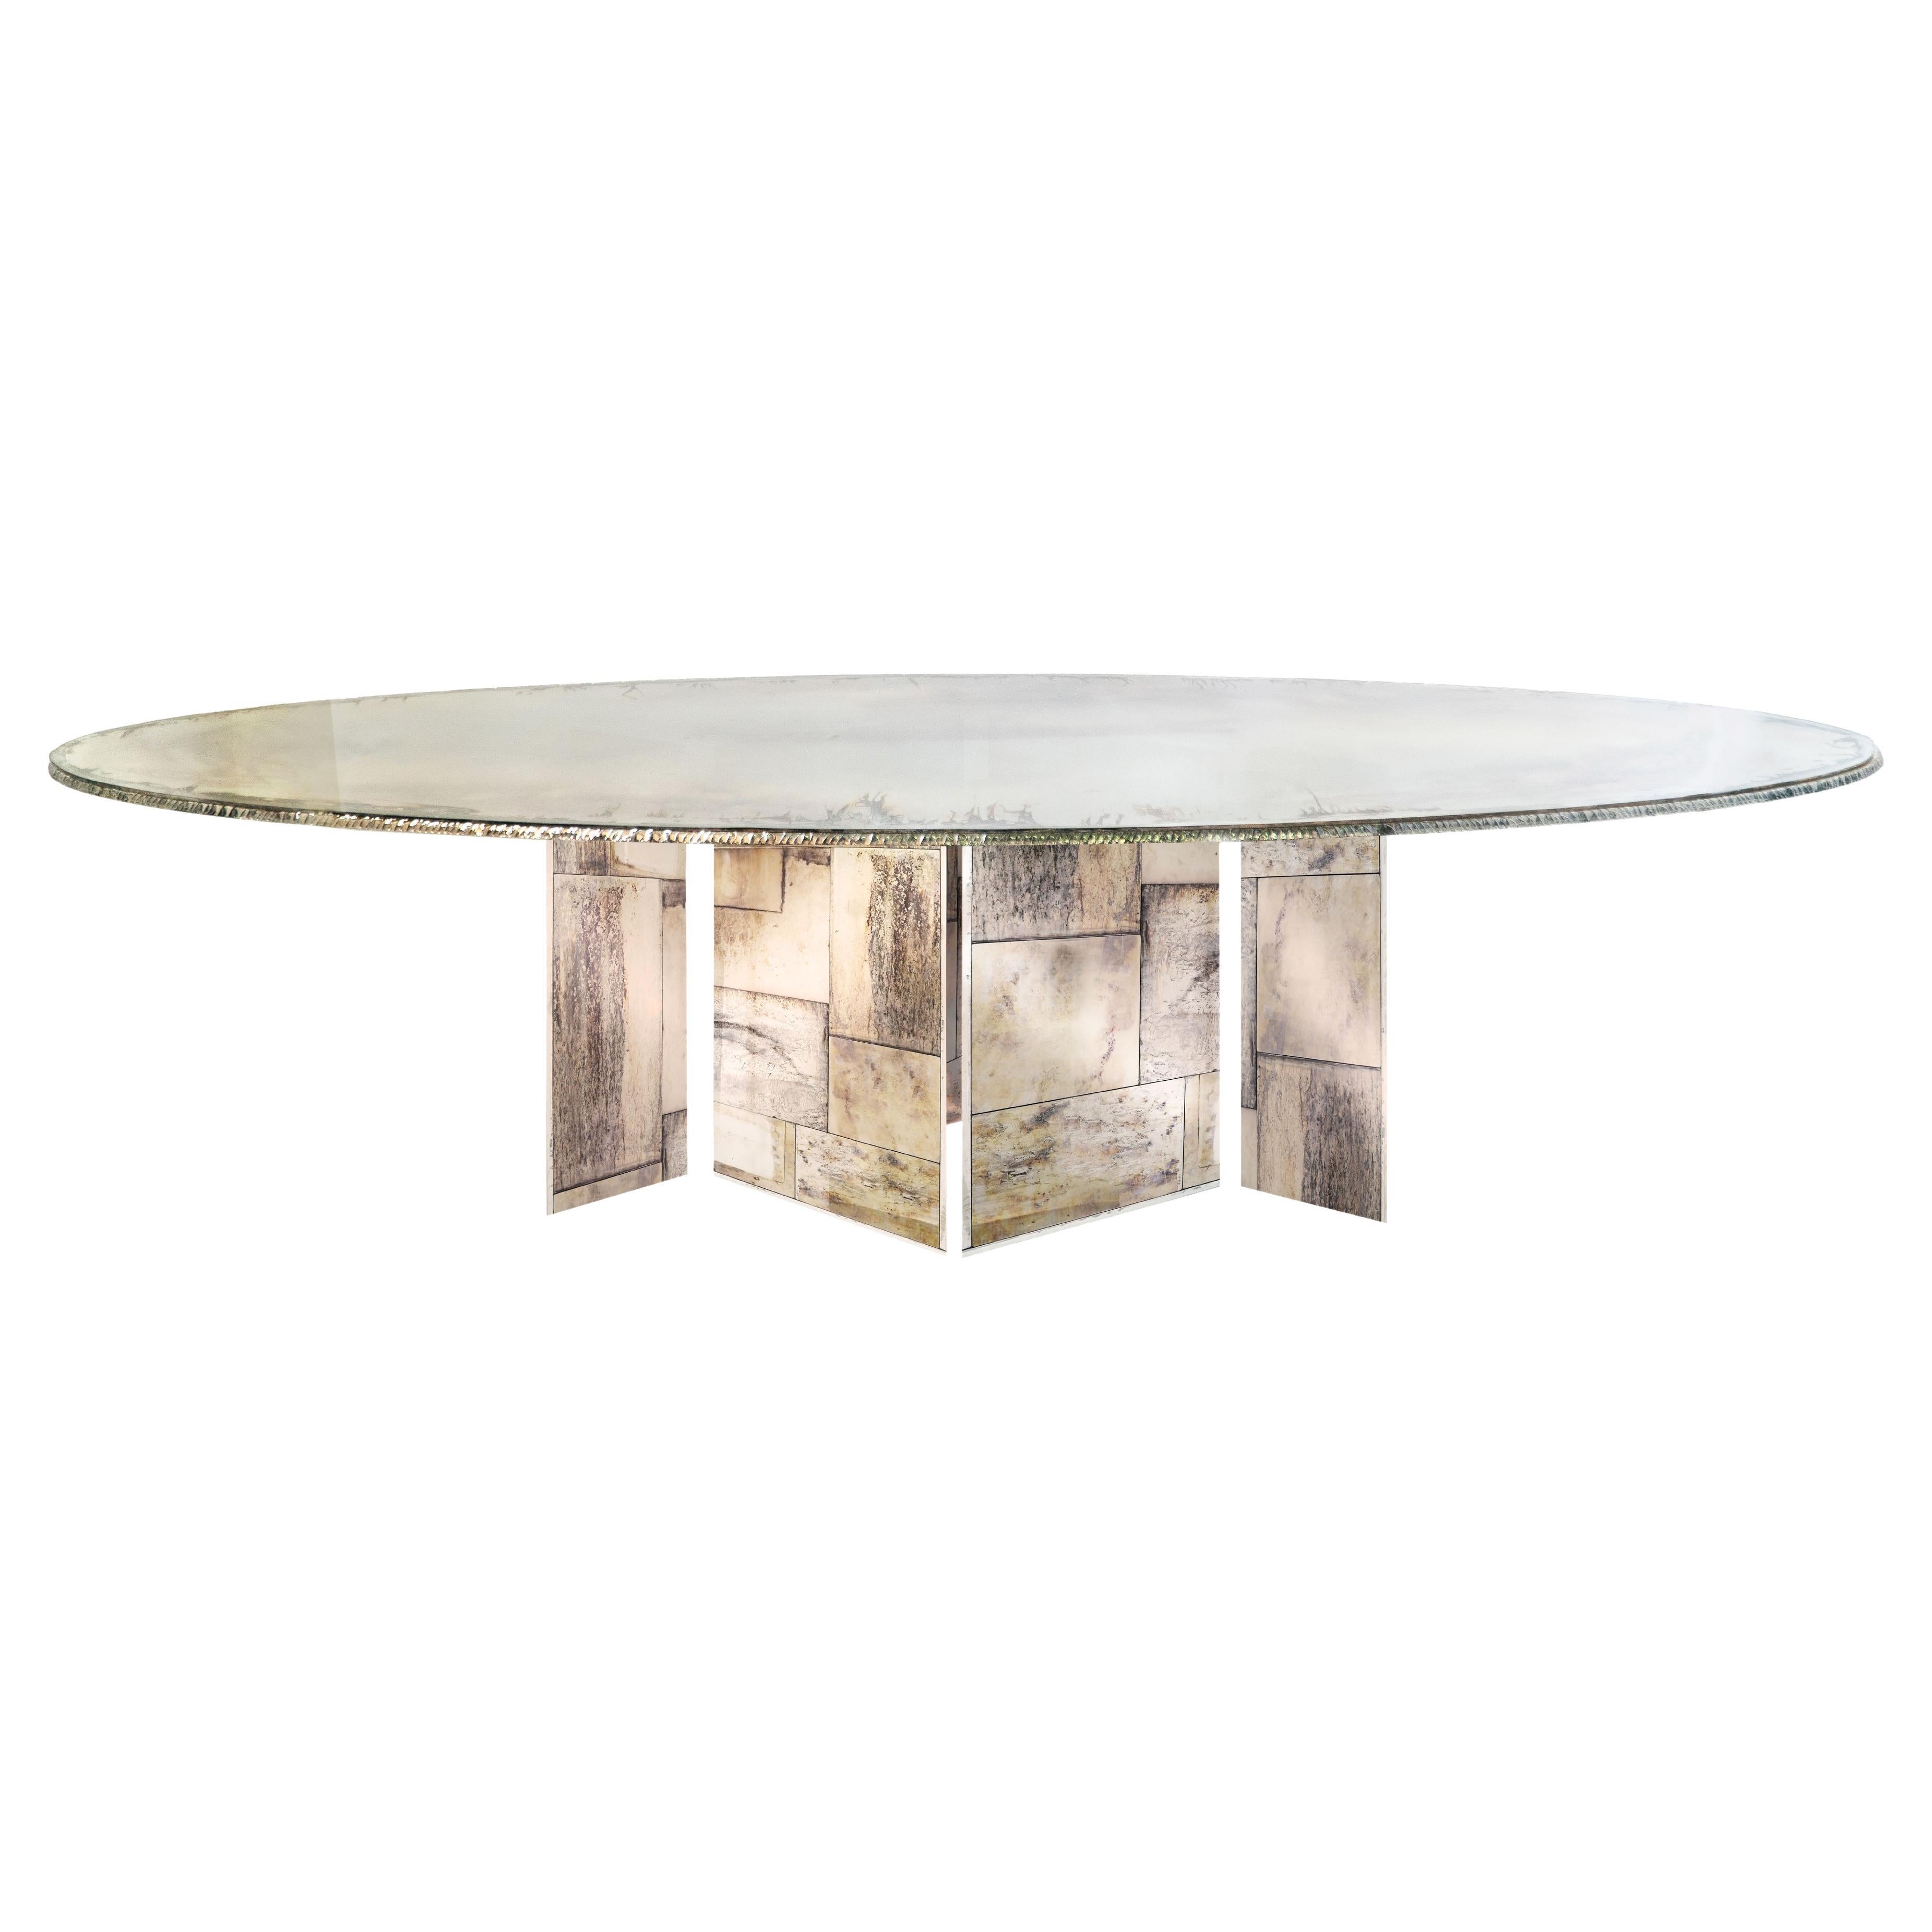 Enhance your elegance and radiate brilliance with our collection of silver tables Flight!
Exquisite pieces that add a touch of shimmer and glamor to your home interior.

Flight is designed with a V-shaped silhouette that fits perfectly with a